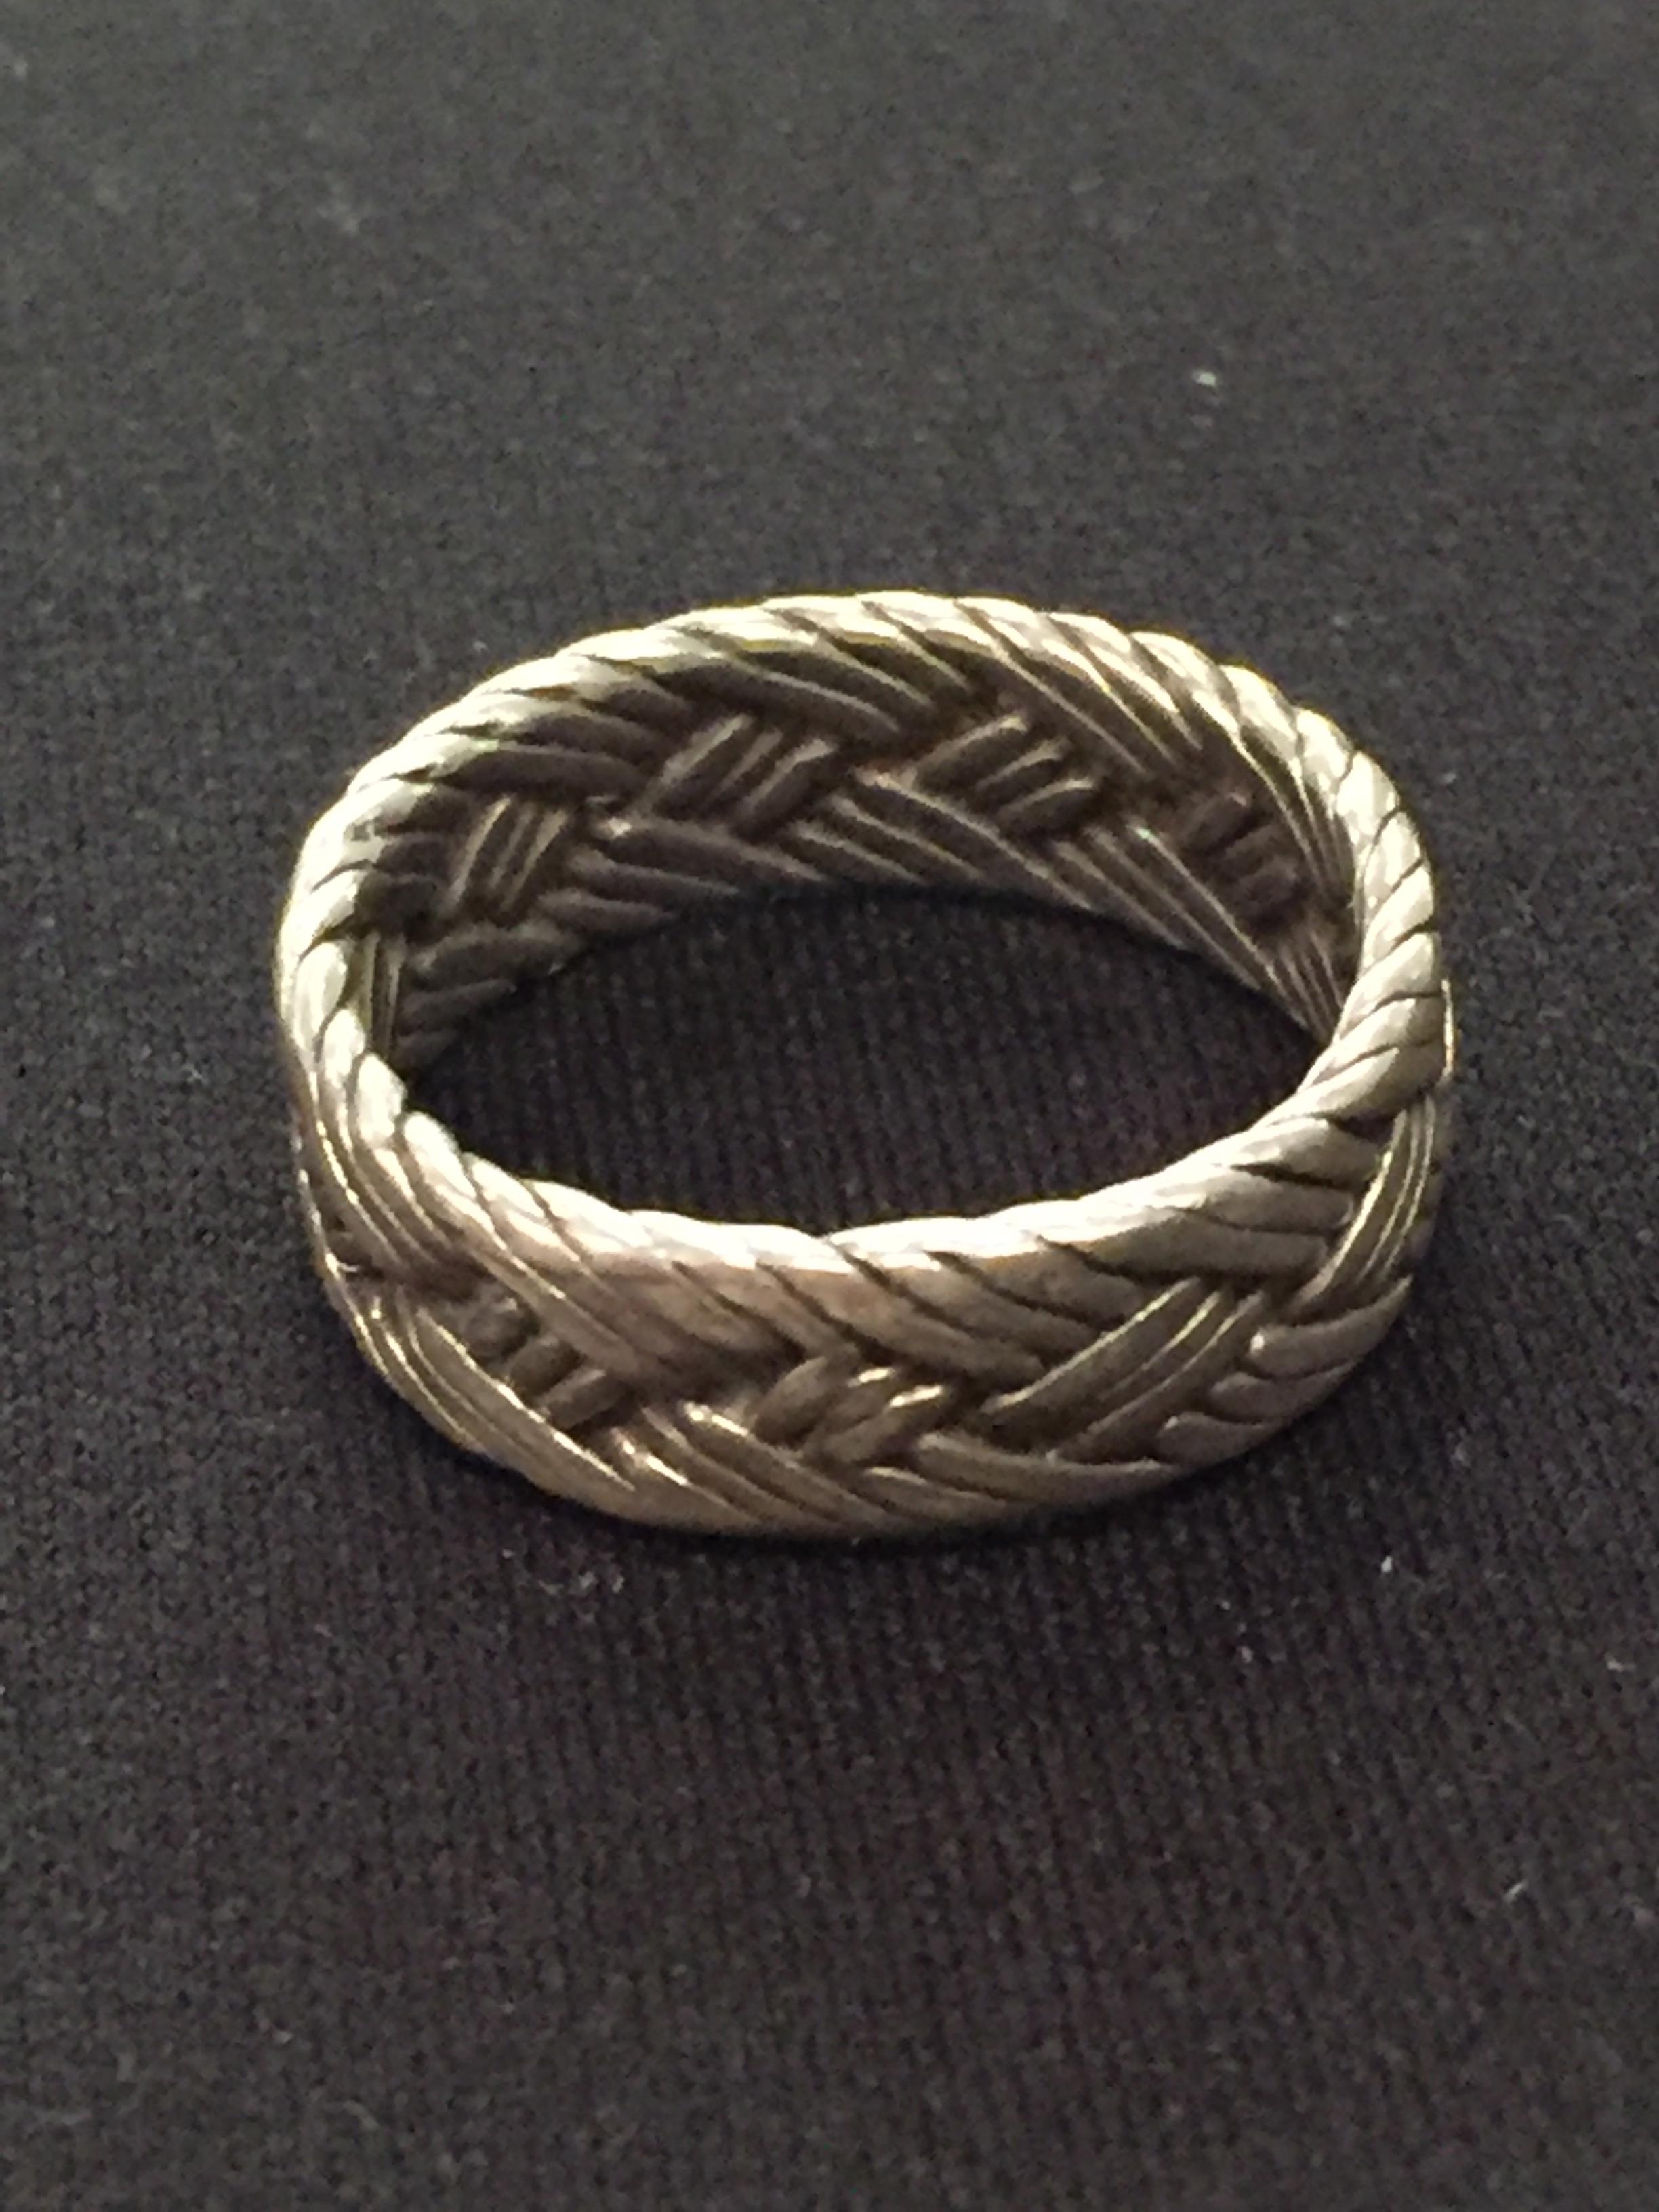 Woven Sterling Silver Thick Ring Band - Size 7